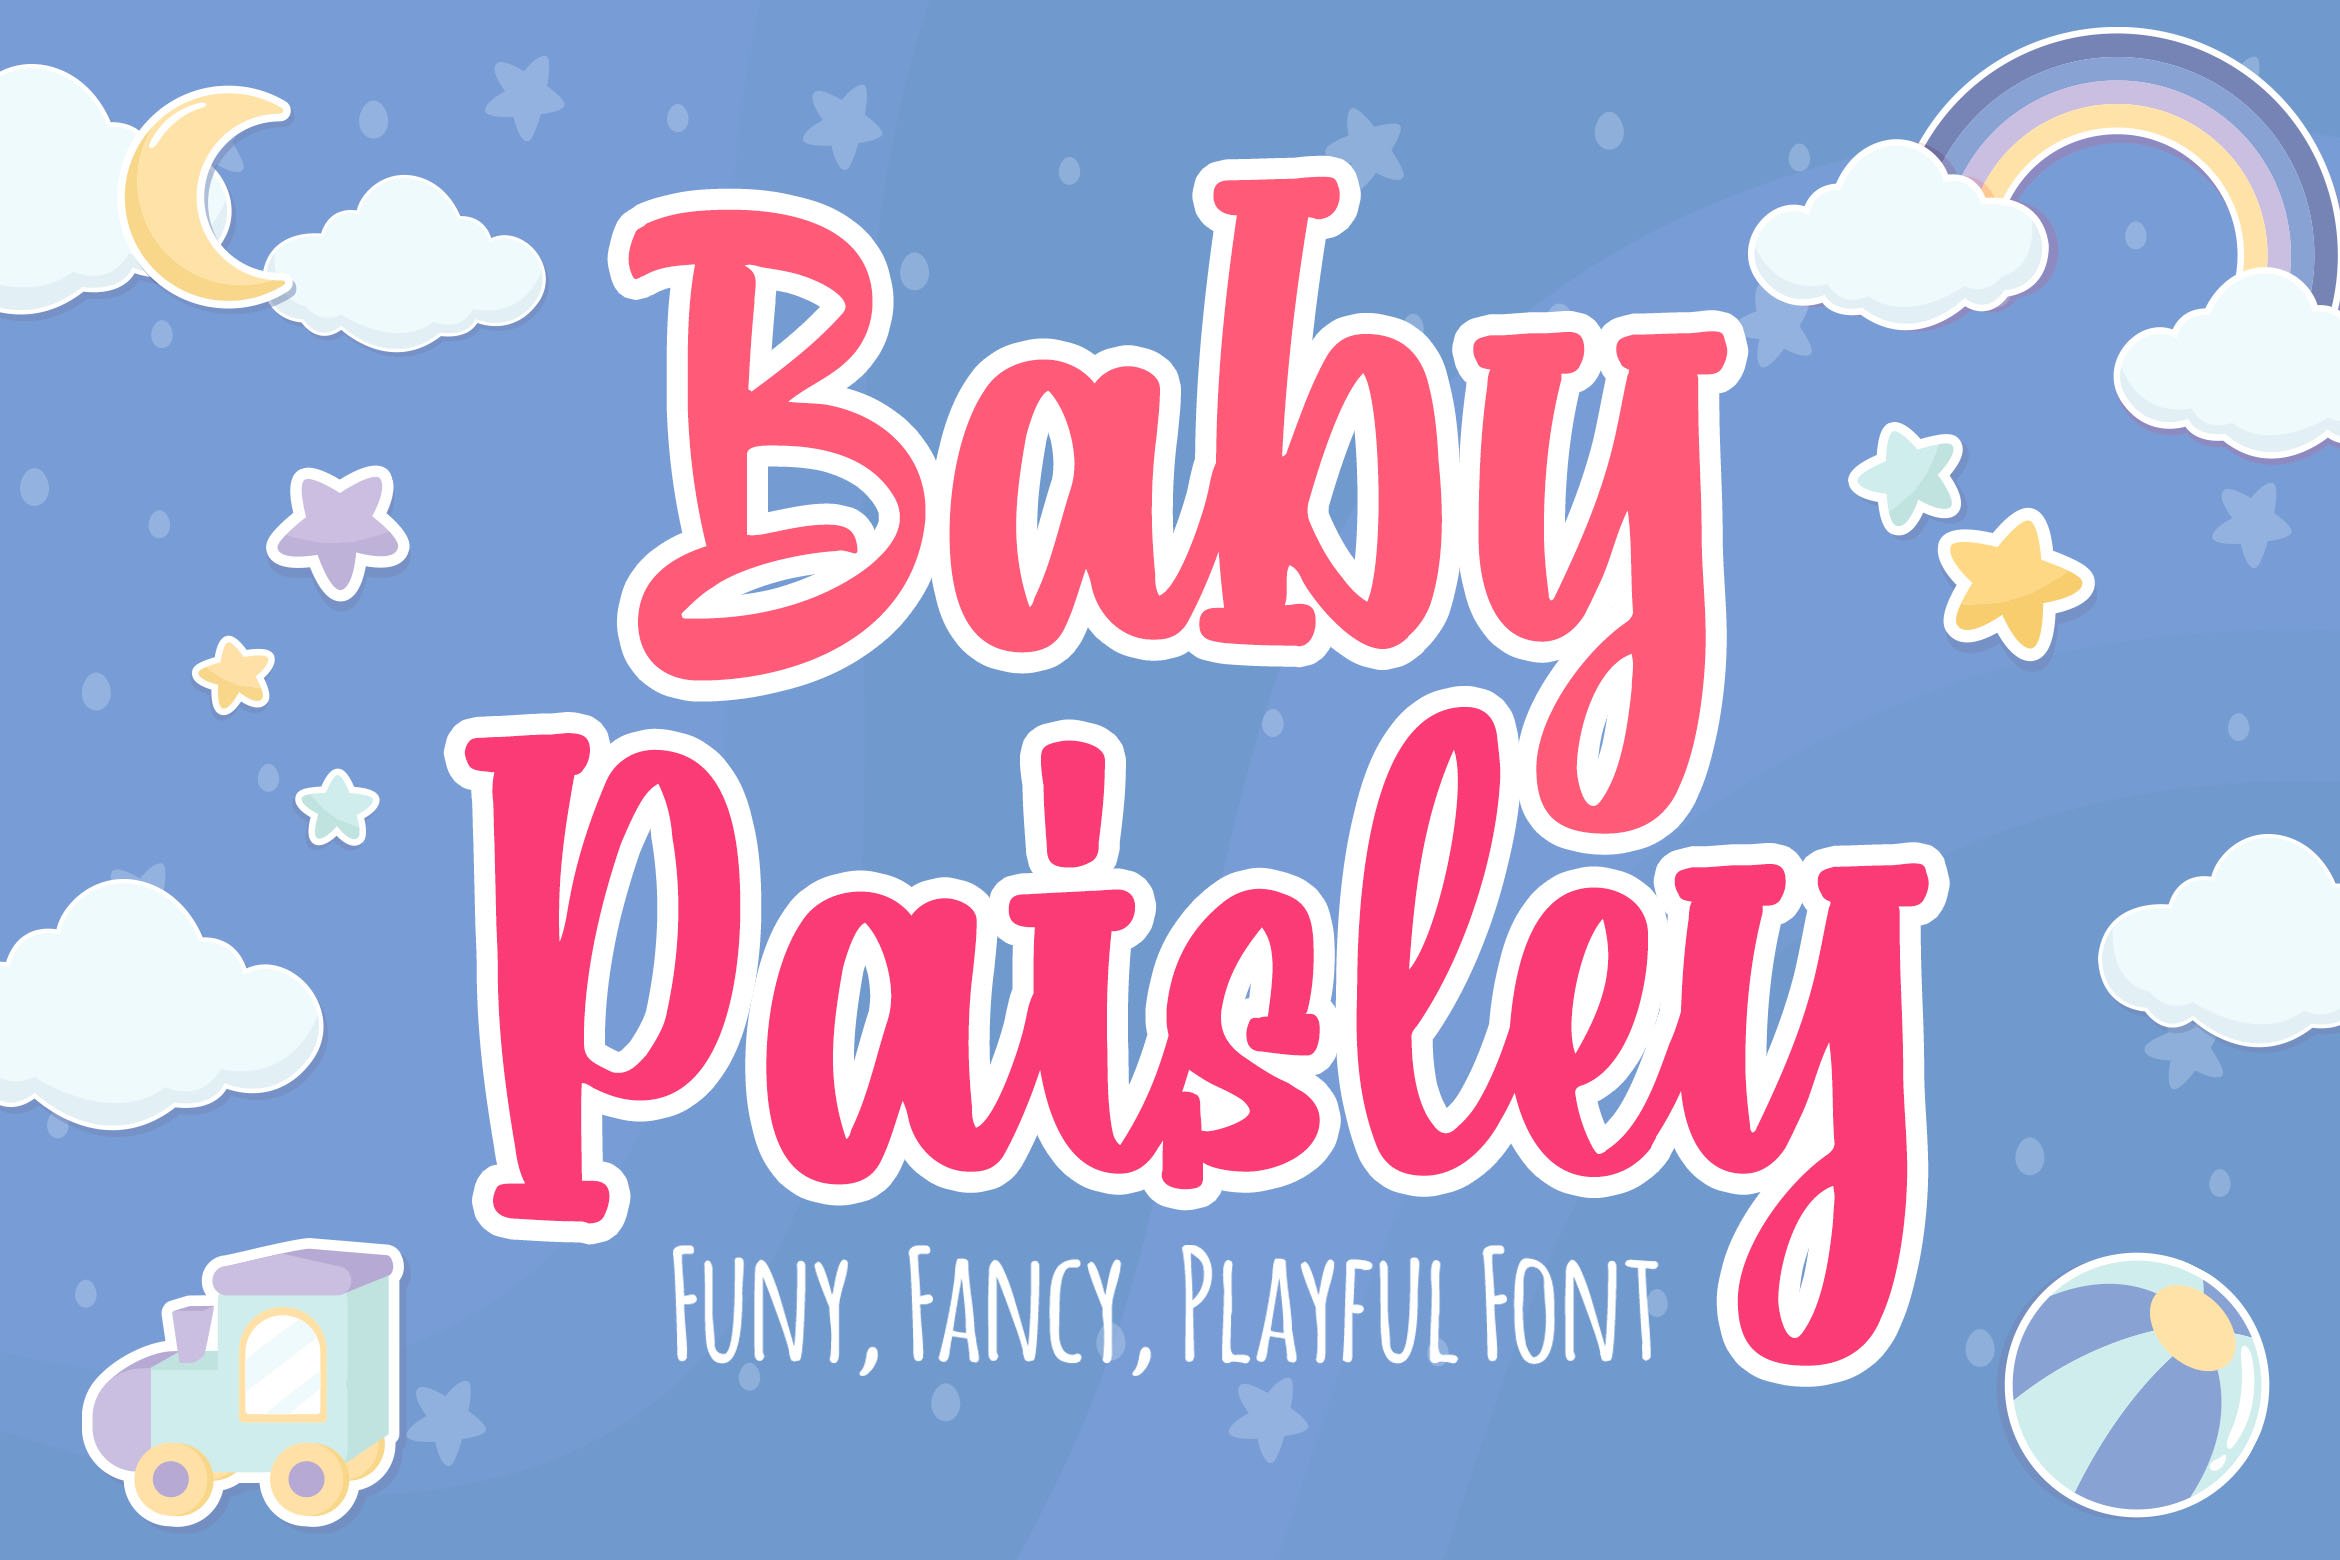 Baby Paisley a Playful Font cover image.